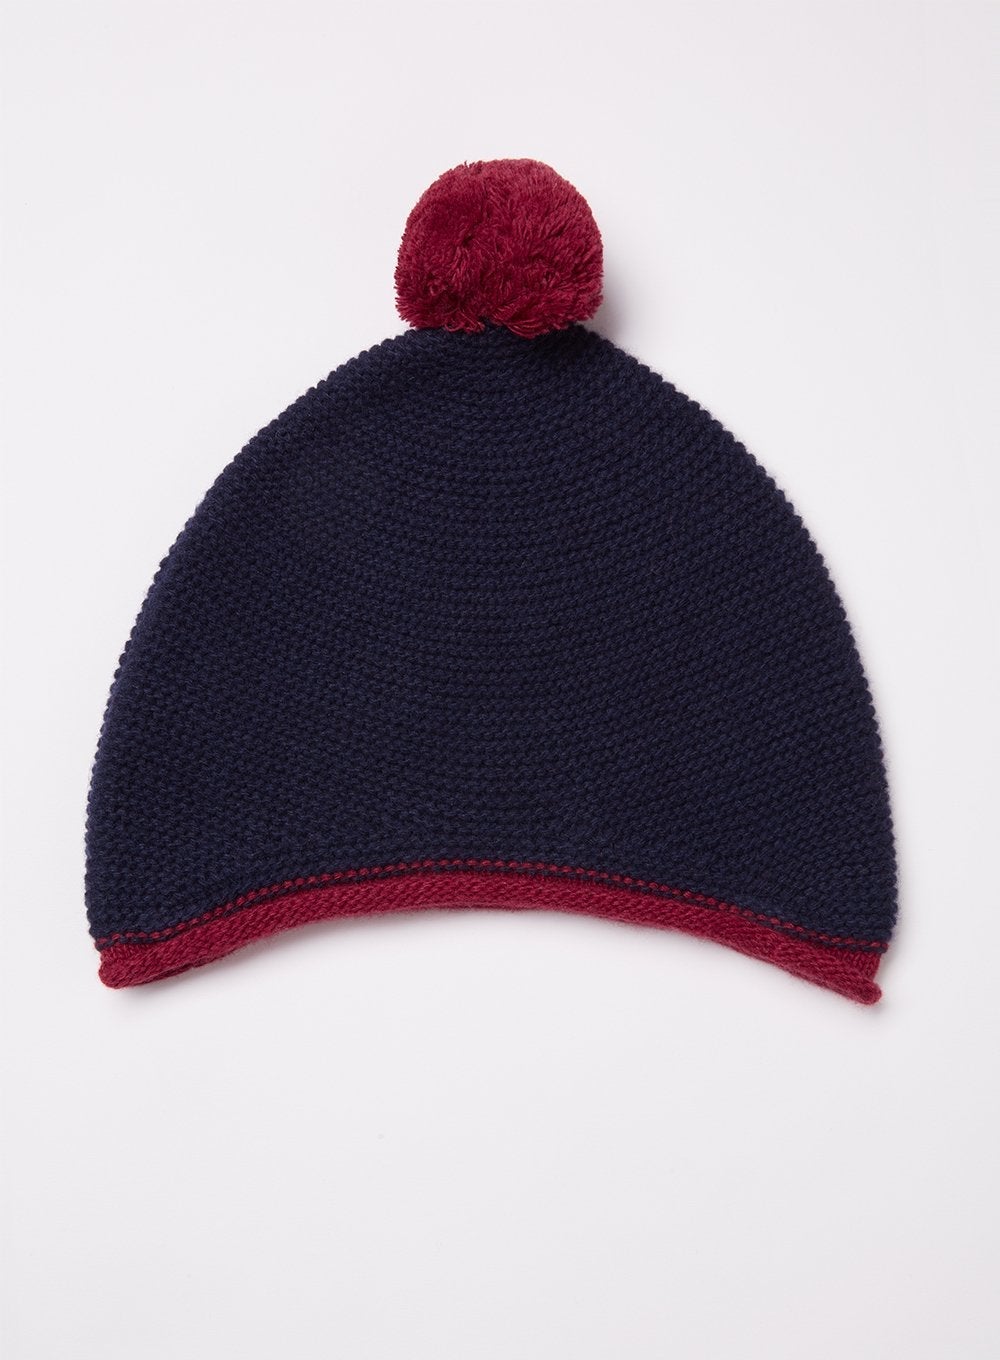 Chelsea Clothing Company Hat Frankie Bobble Hat in Navy - Trotters Childrenswear